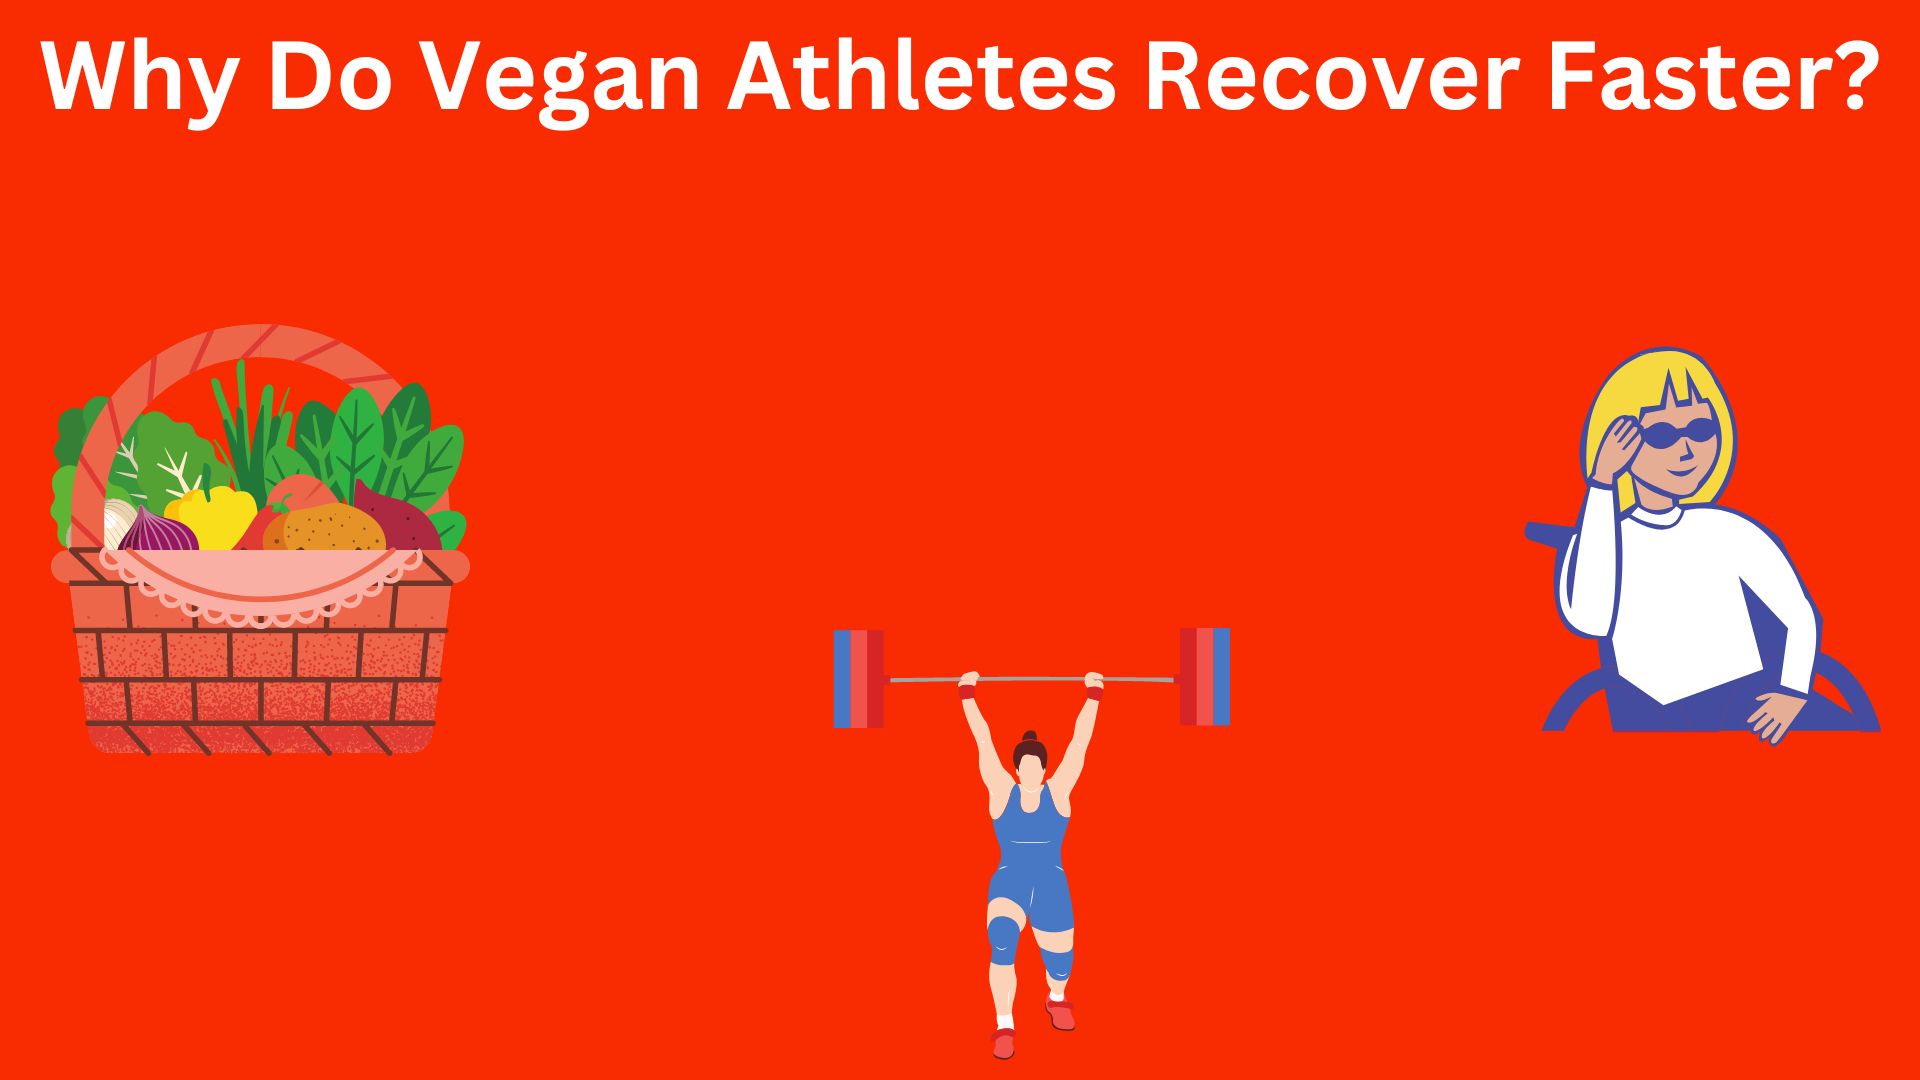 Why Do Vegan Athletes Recover Faster